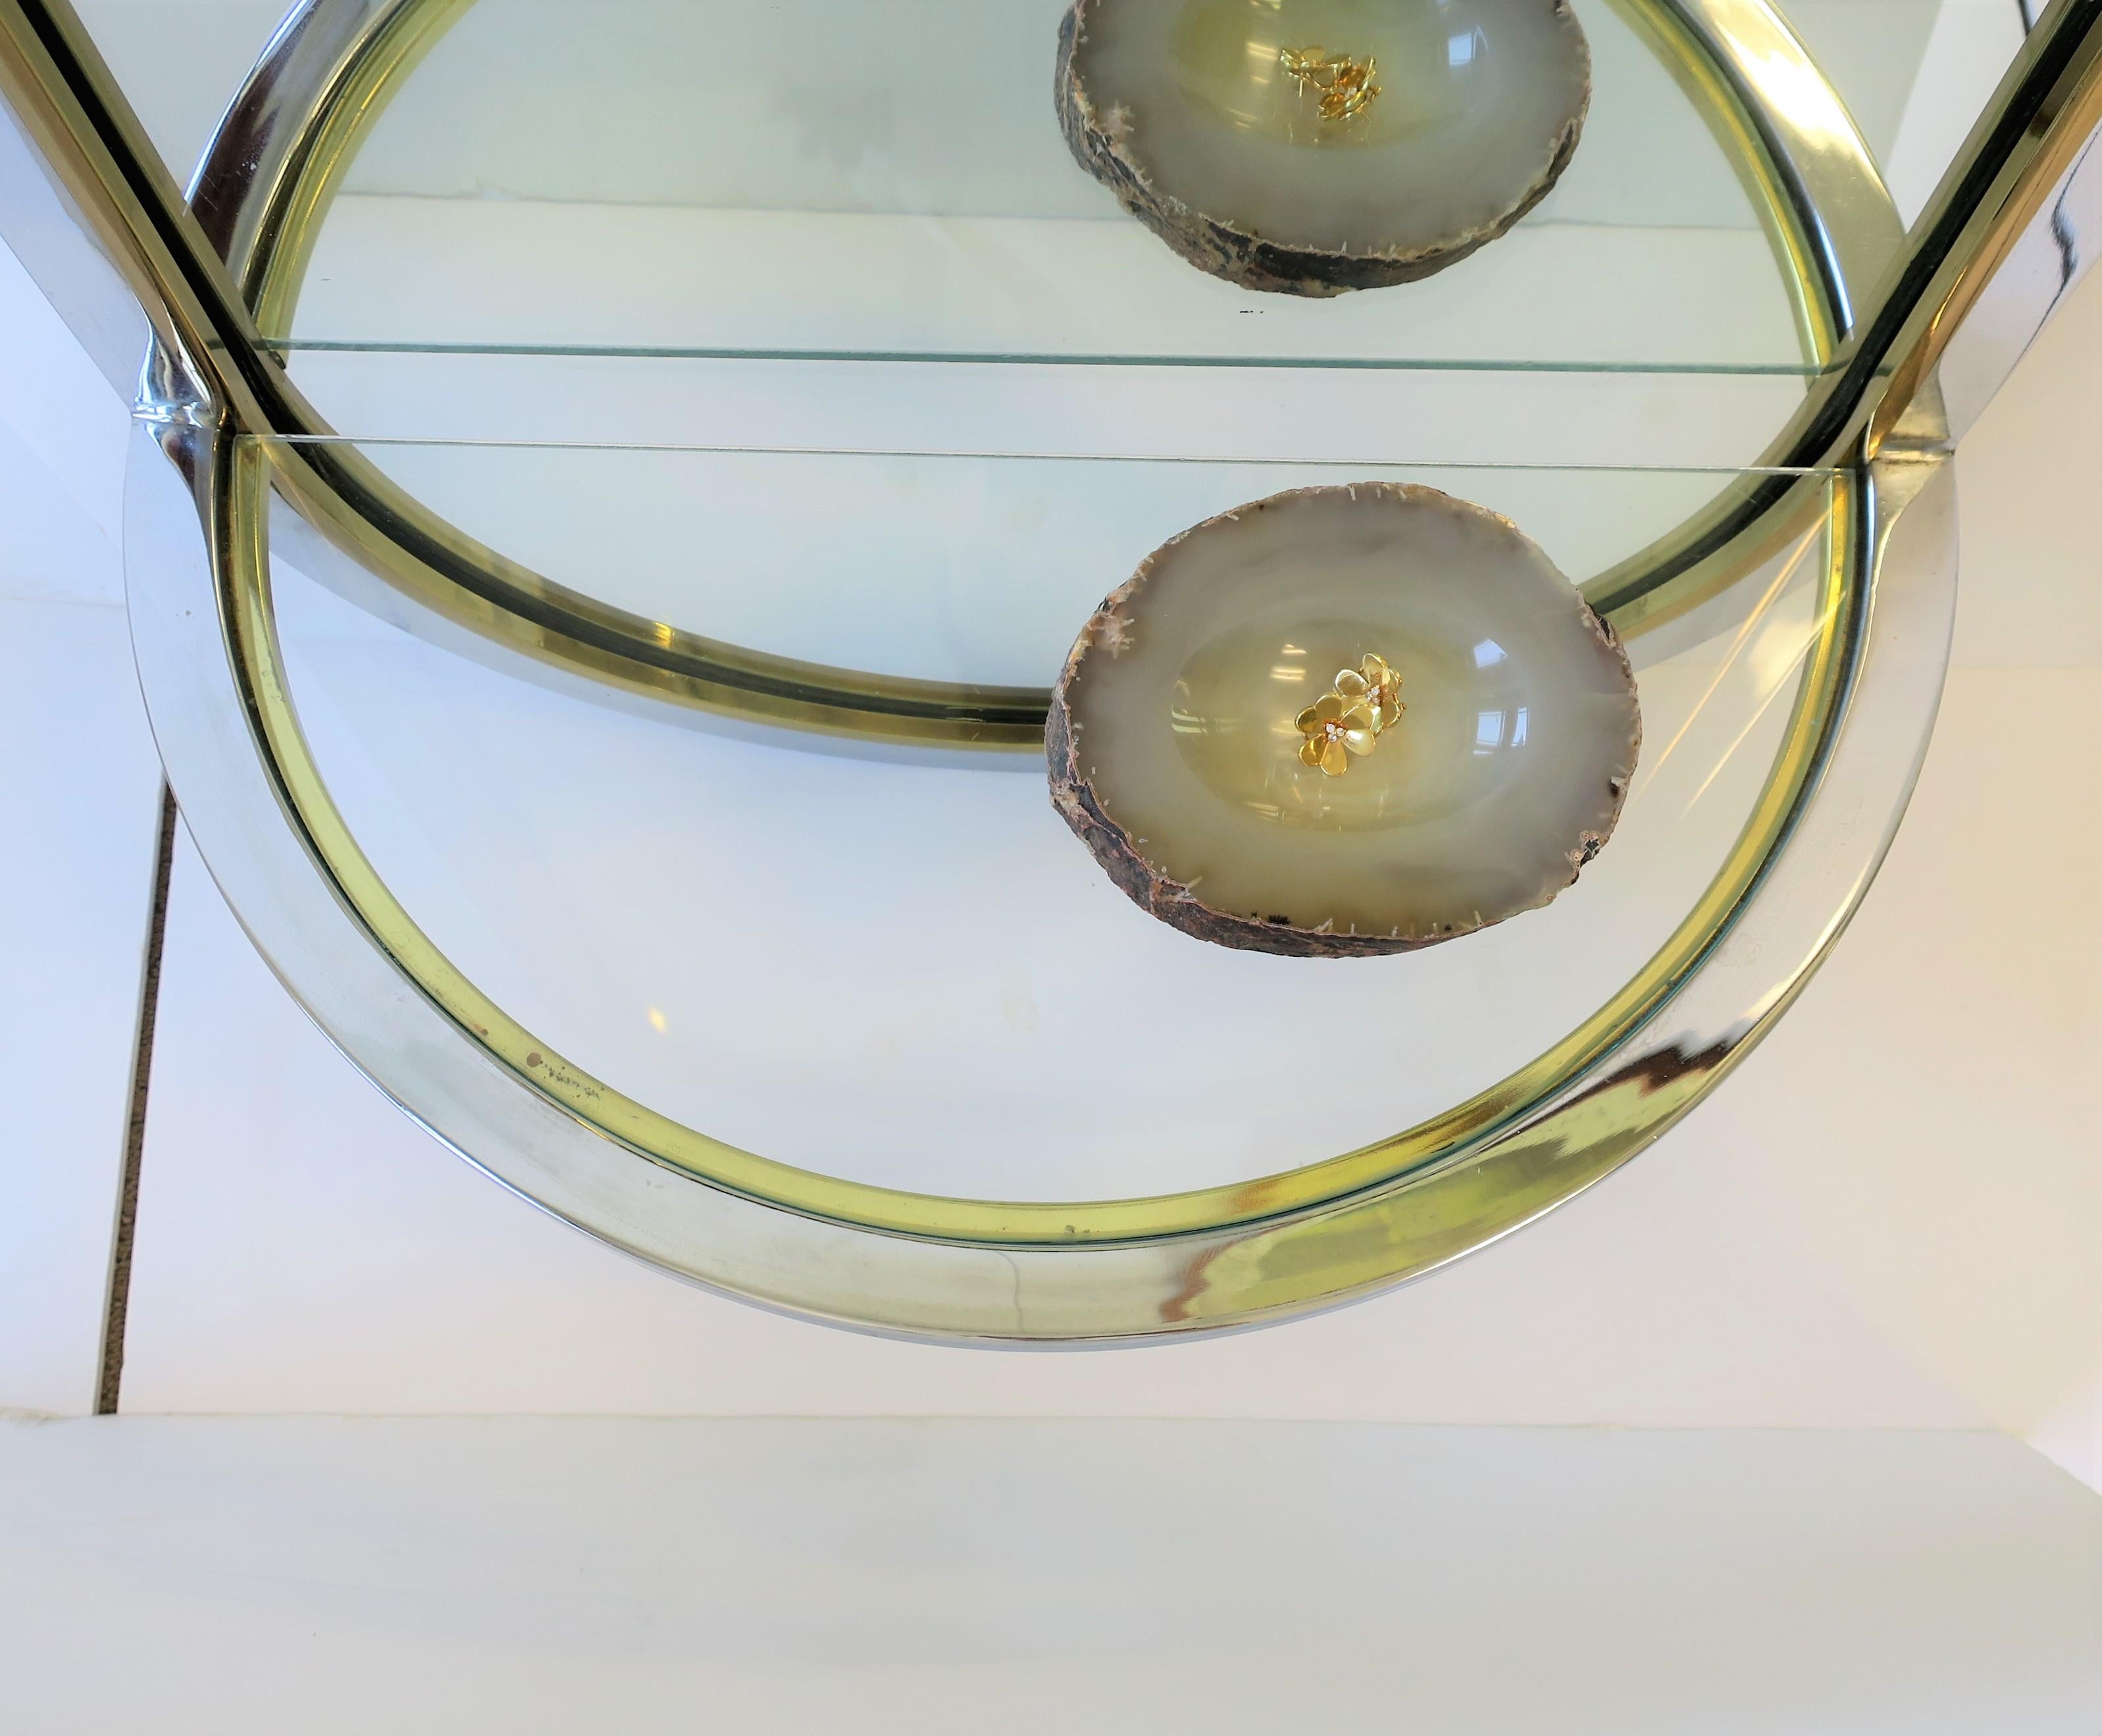 20th Century Brass and Chrome Wall Mirror with Console Shelf Modern Postmodern